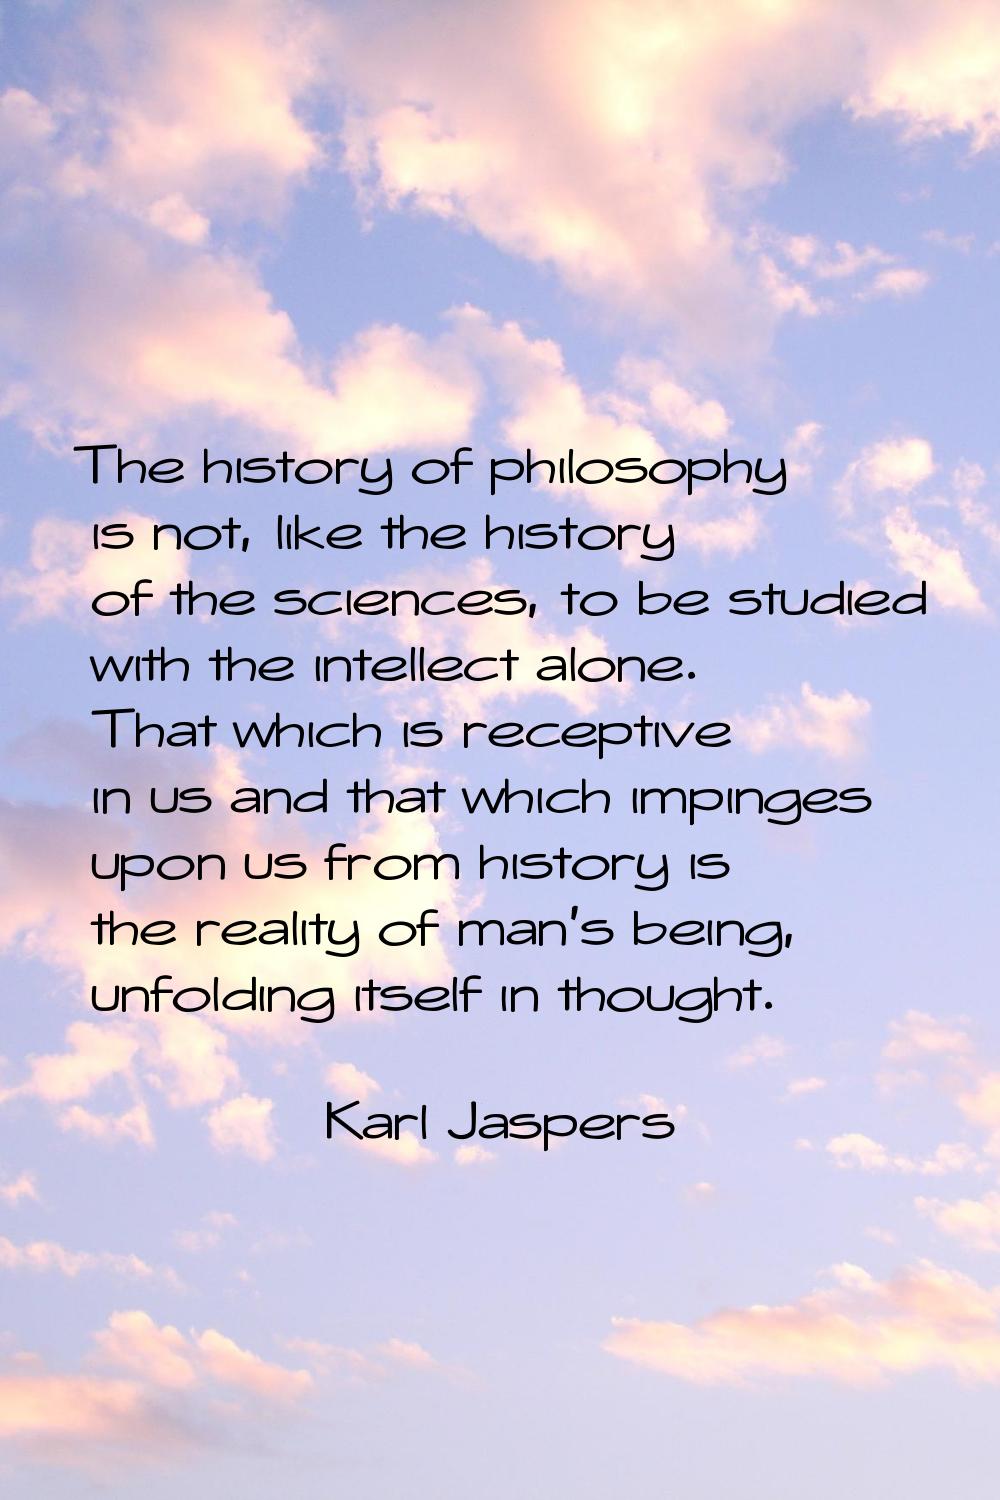 The history of philosophy is not, like the history of the sciences, to be studied with the intellec